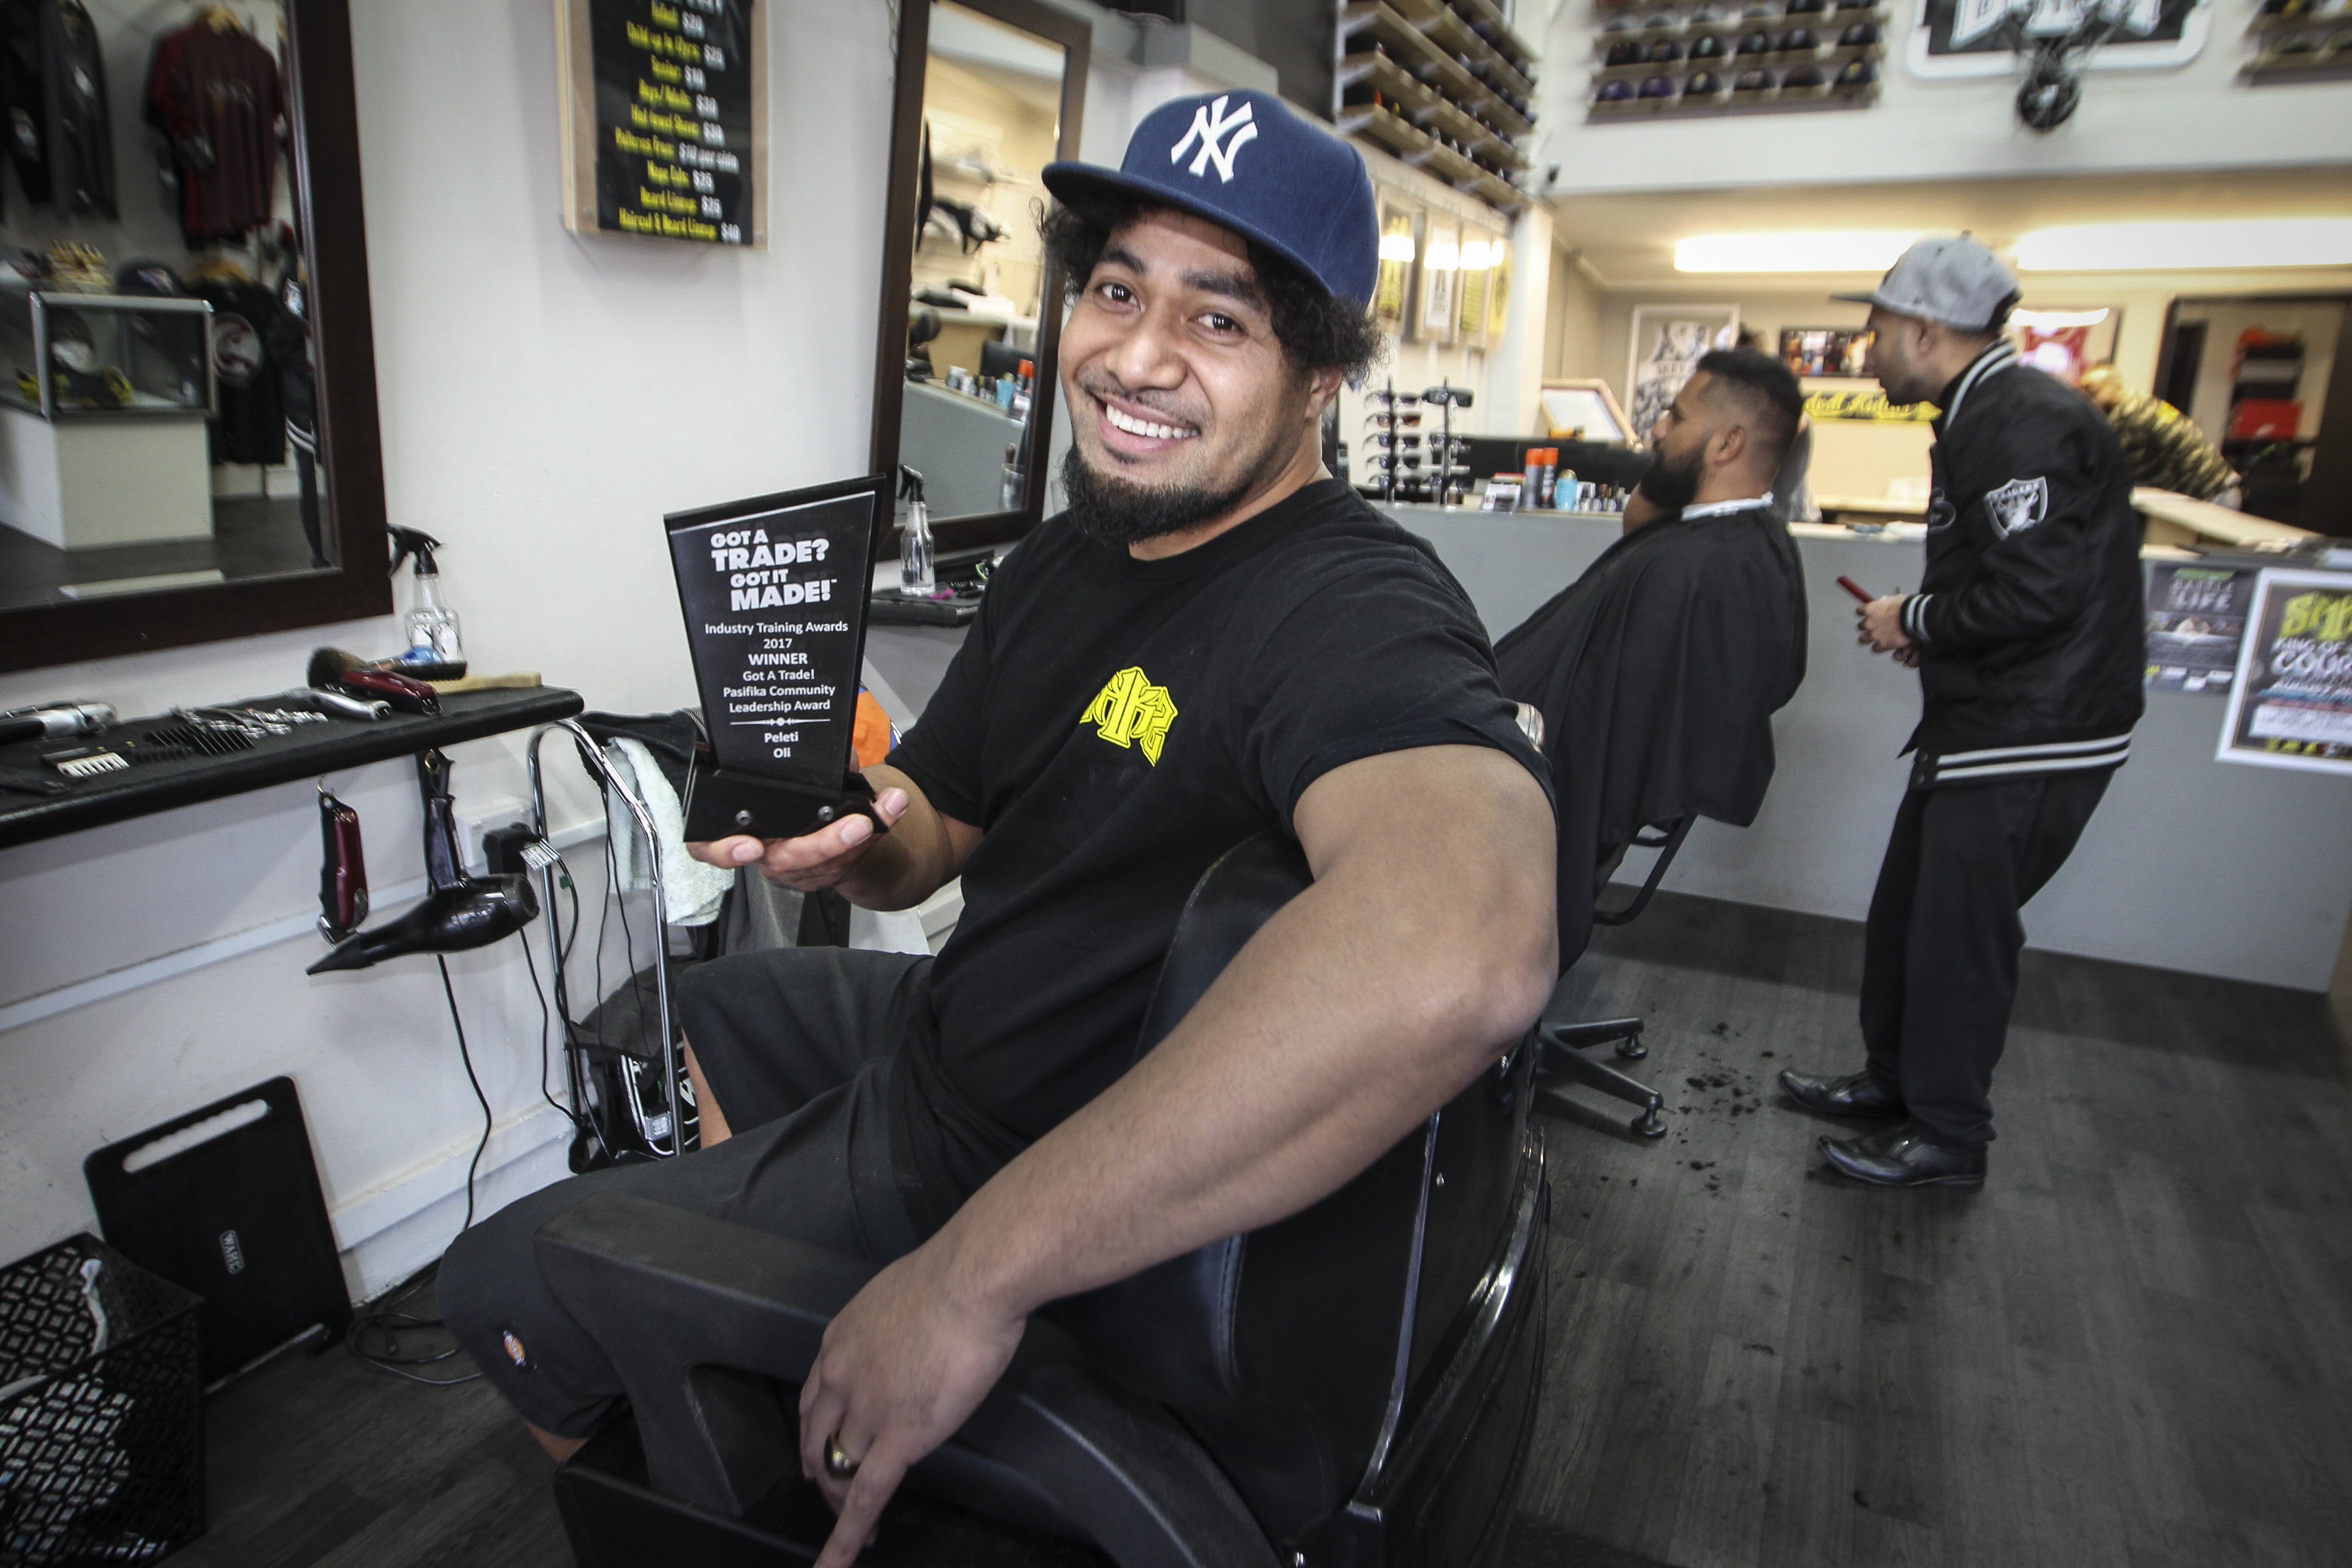 Locally-made pomade a hit, says Thorold barber - Thorold News